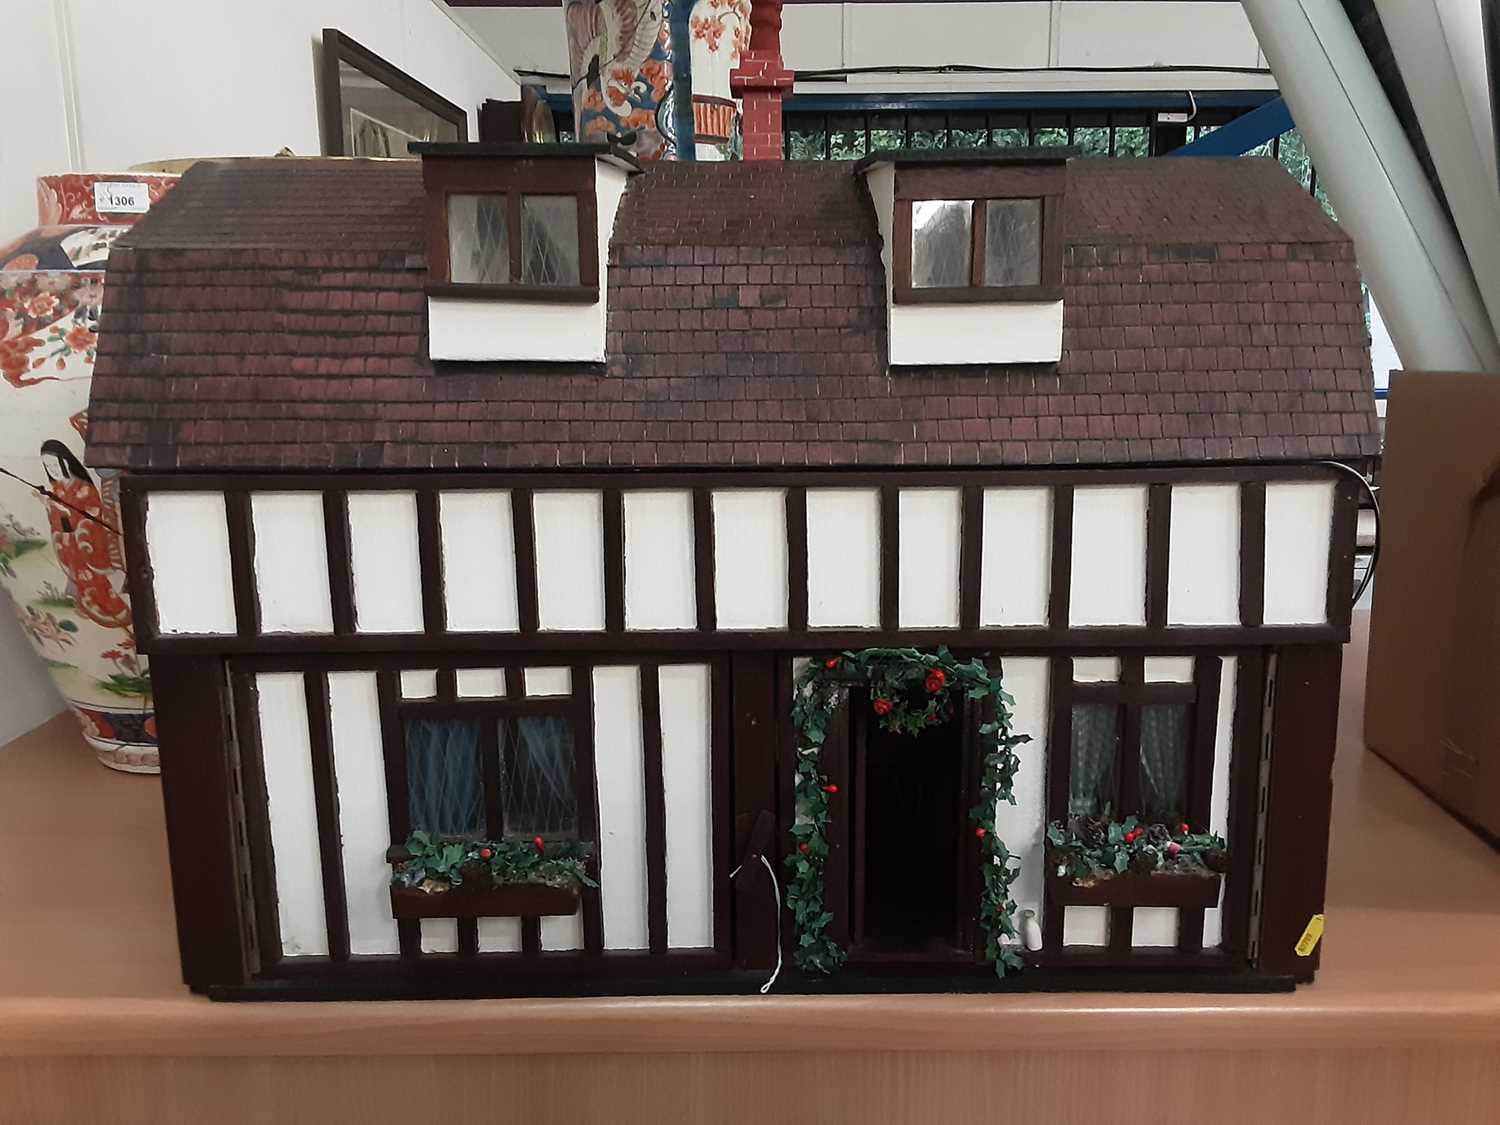 Lot 2 - Good quality dolls house by G Ponnock. with electric light fitting and fitted with furniture